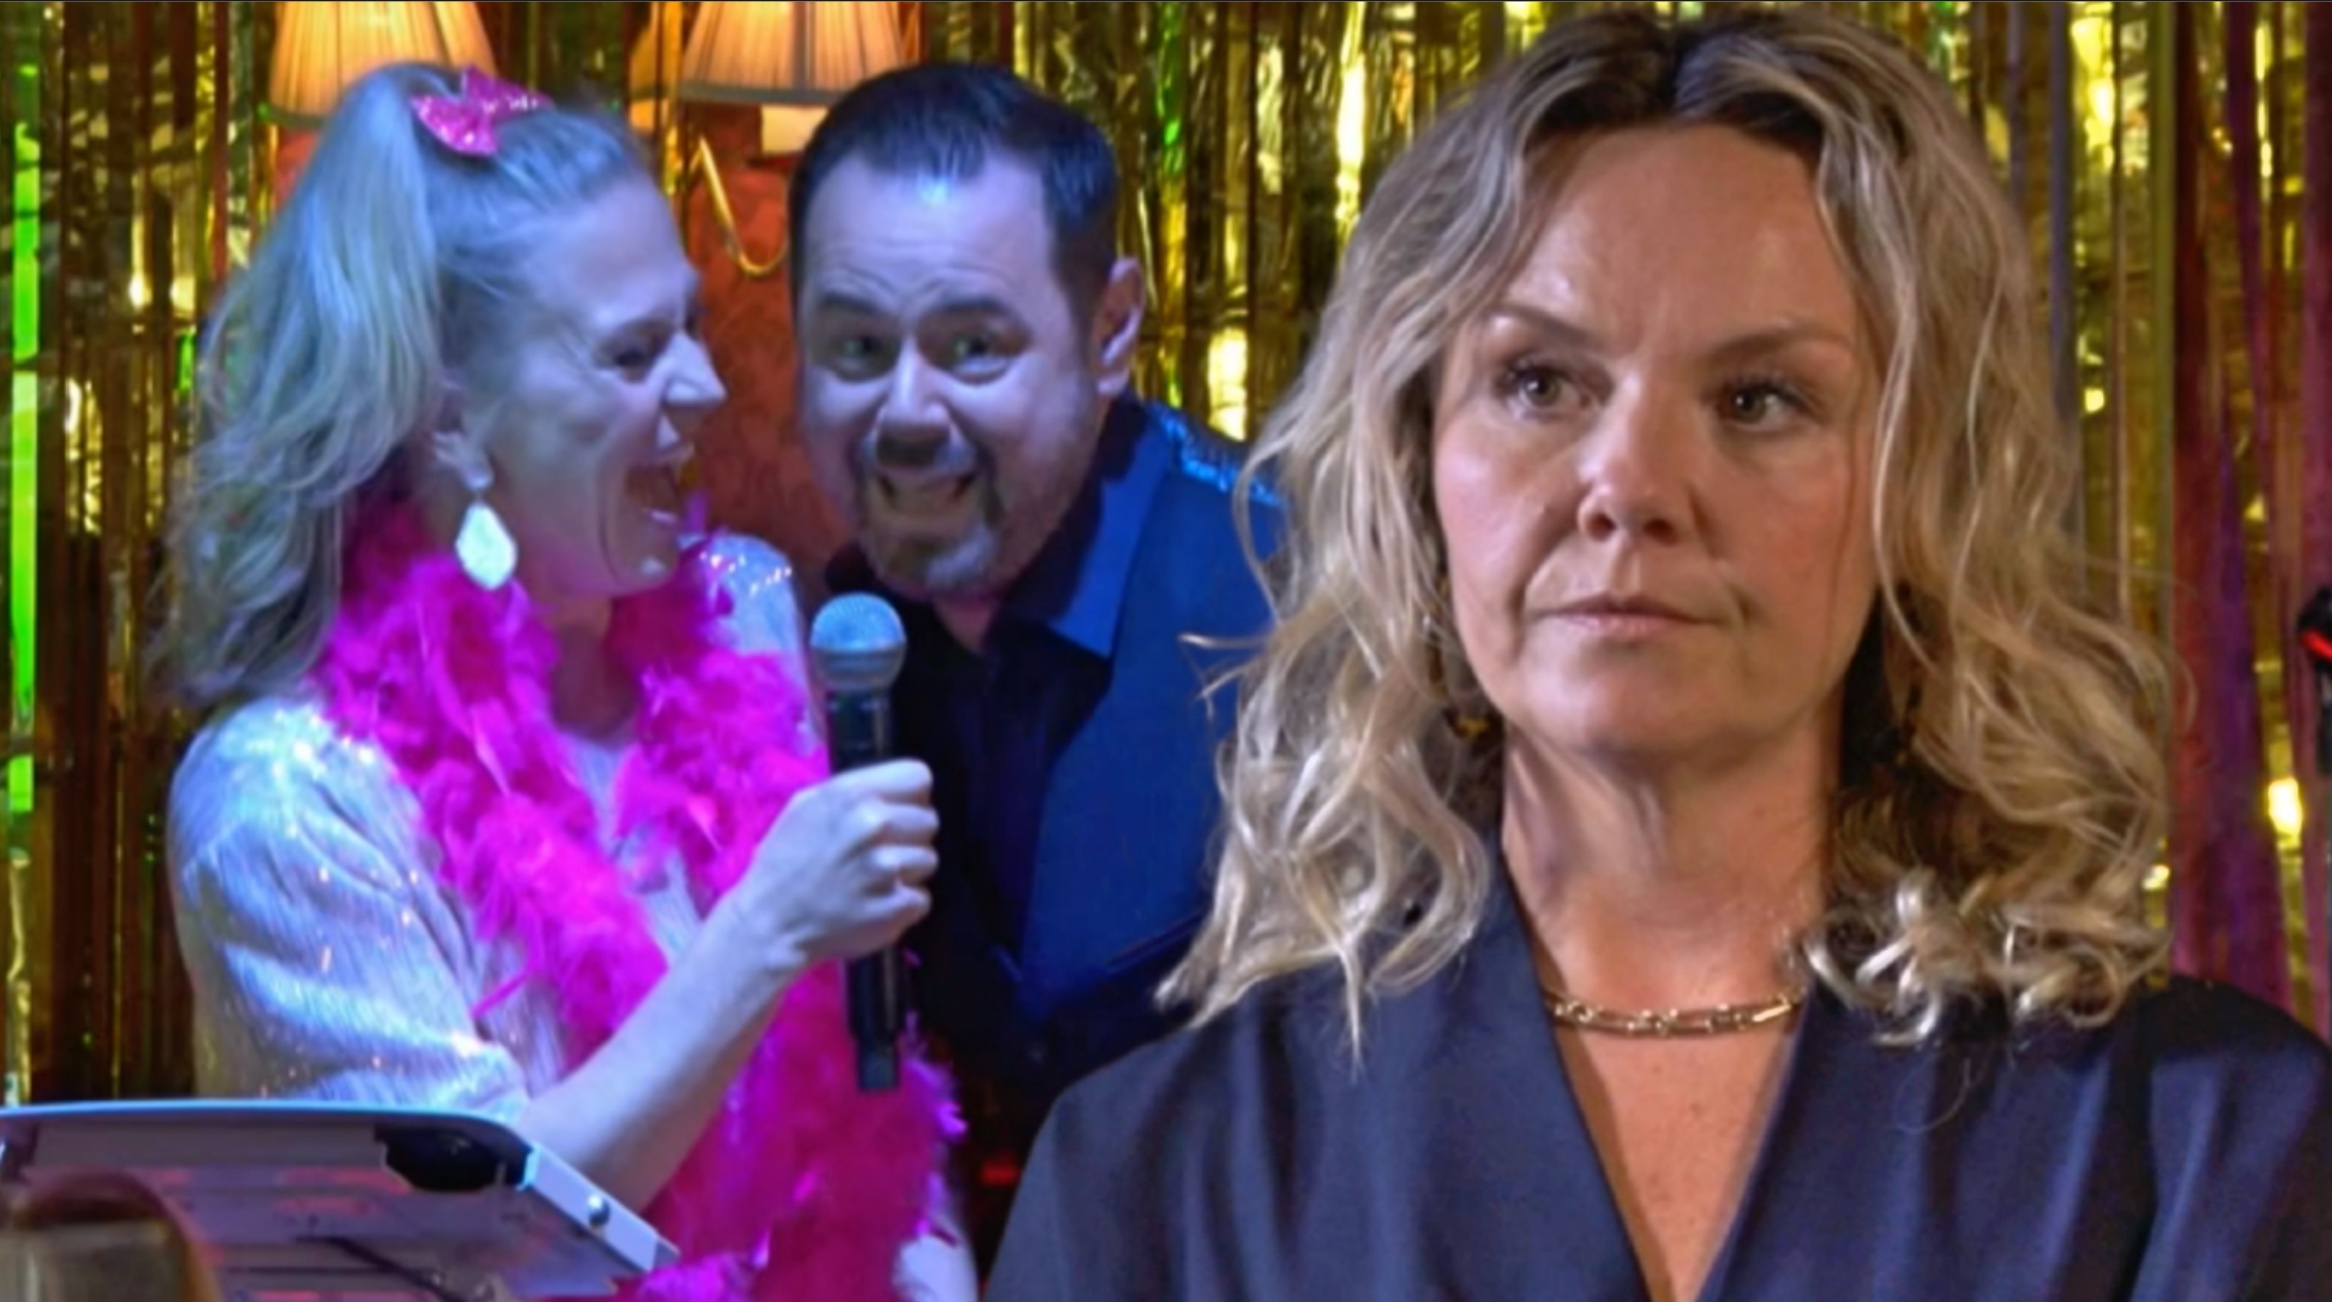 EastEnders spoilers: Mick and Linda Carter reunion set in motion as Janine Butcher seethes with jealousy